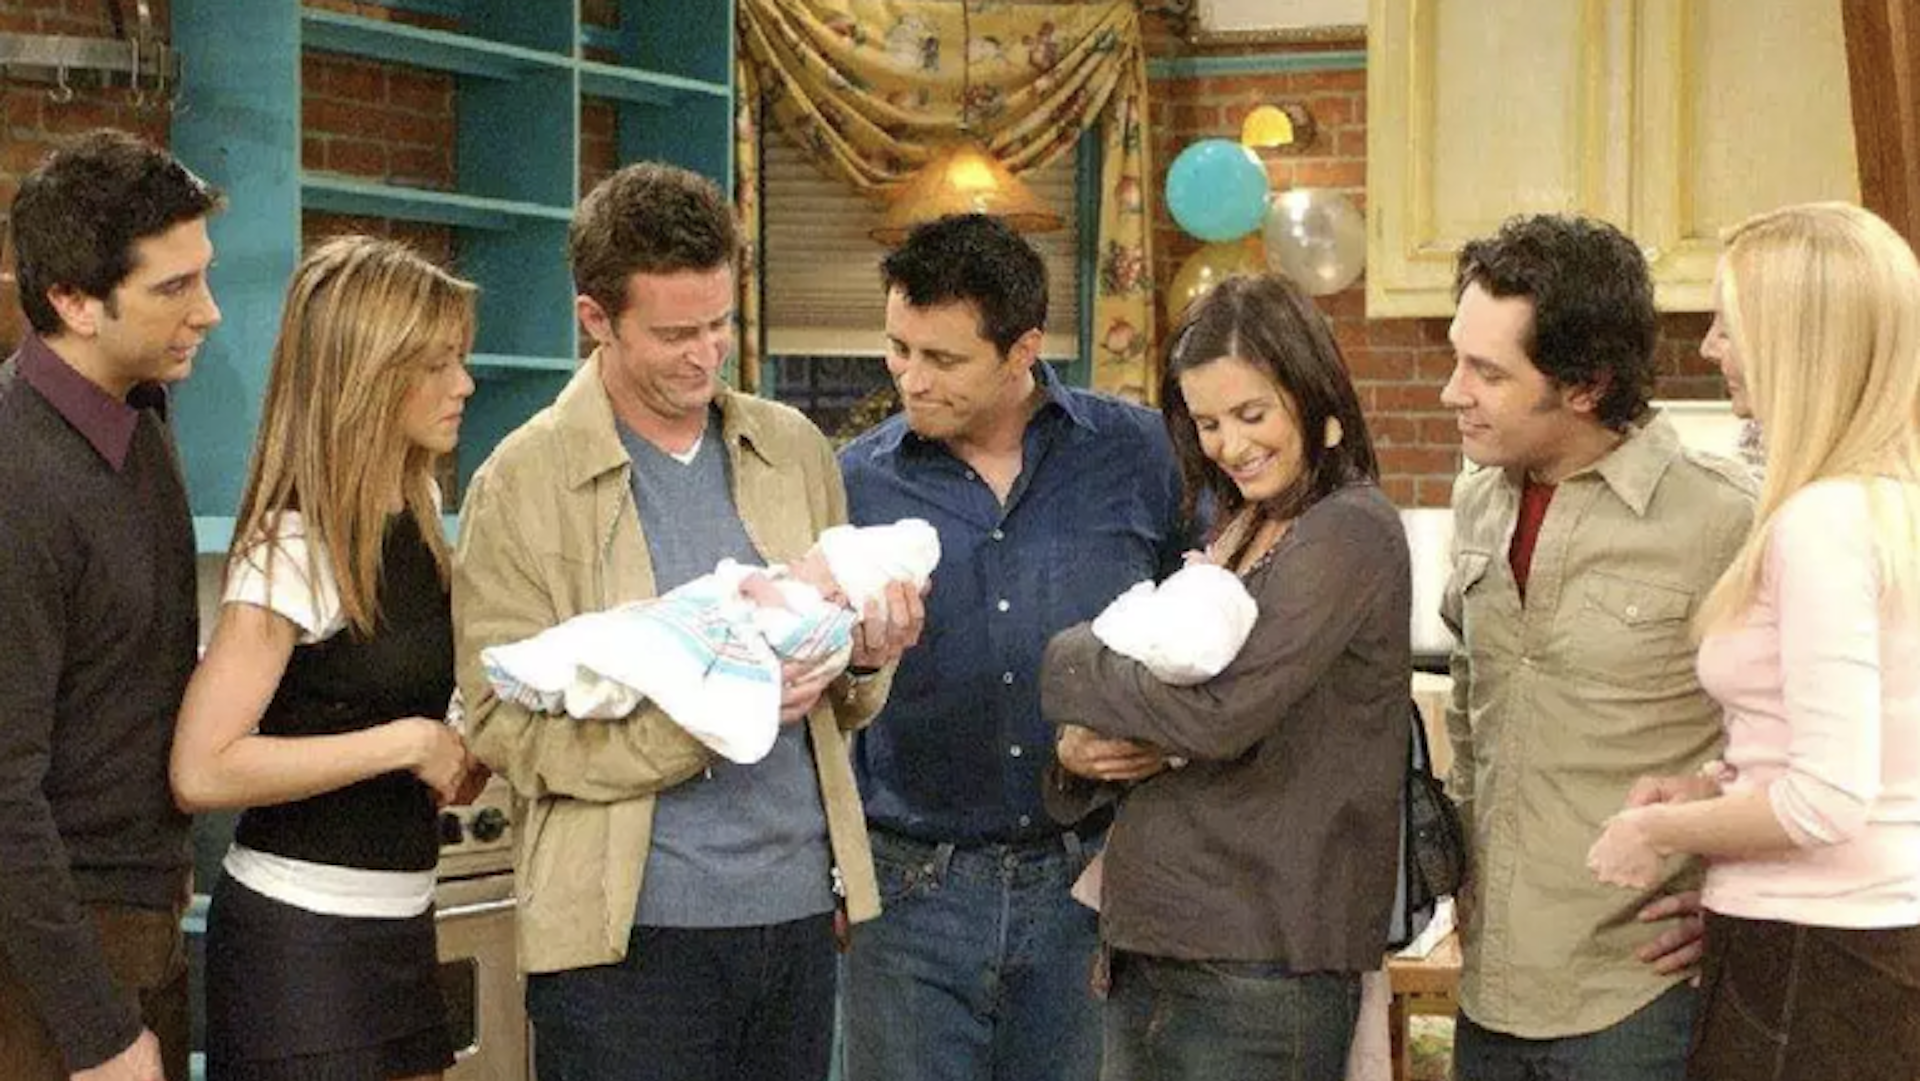 The cast of Friends look at babies